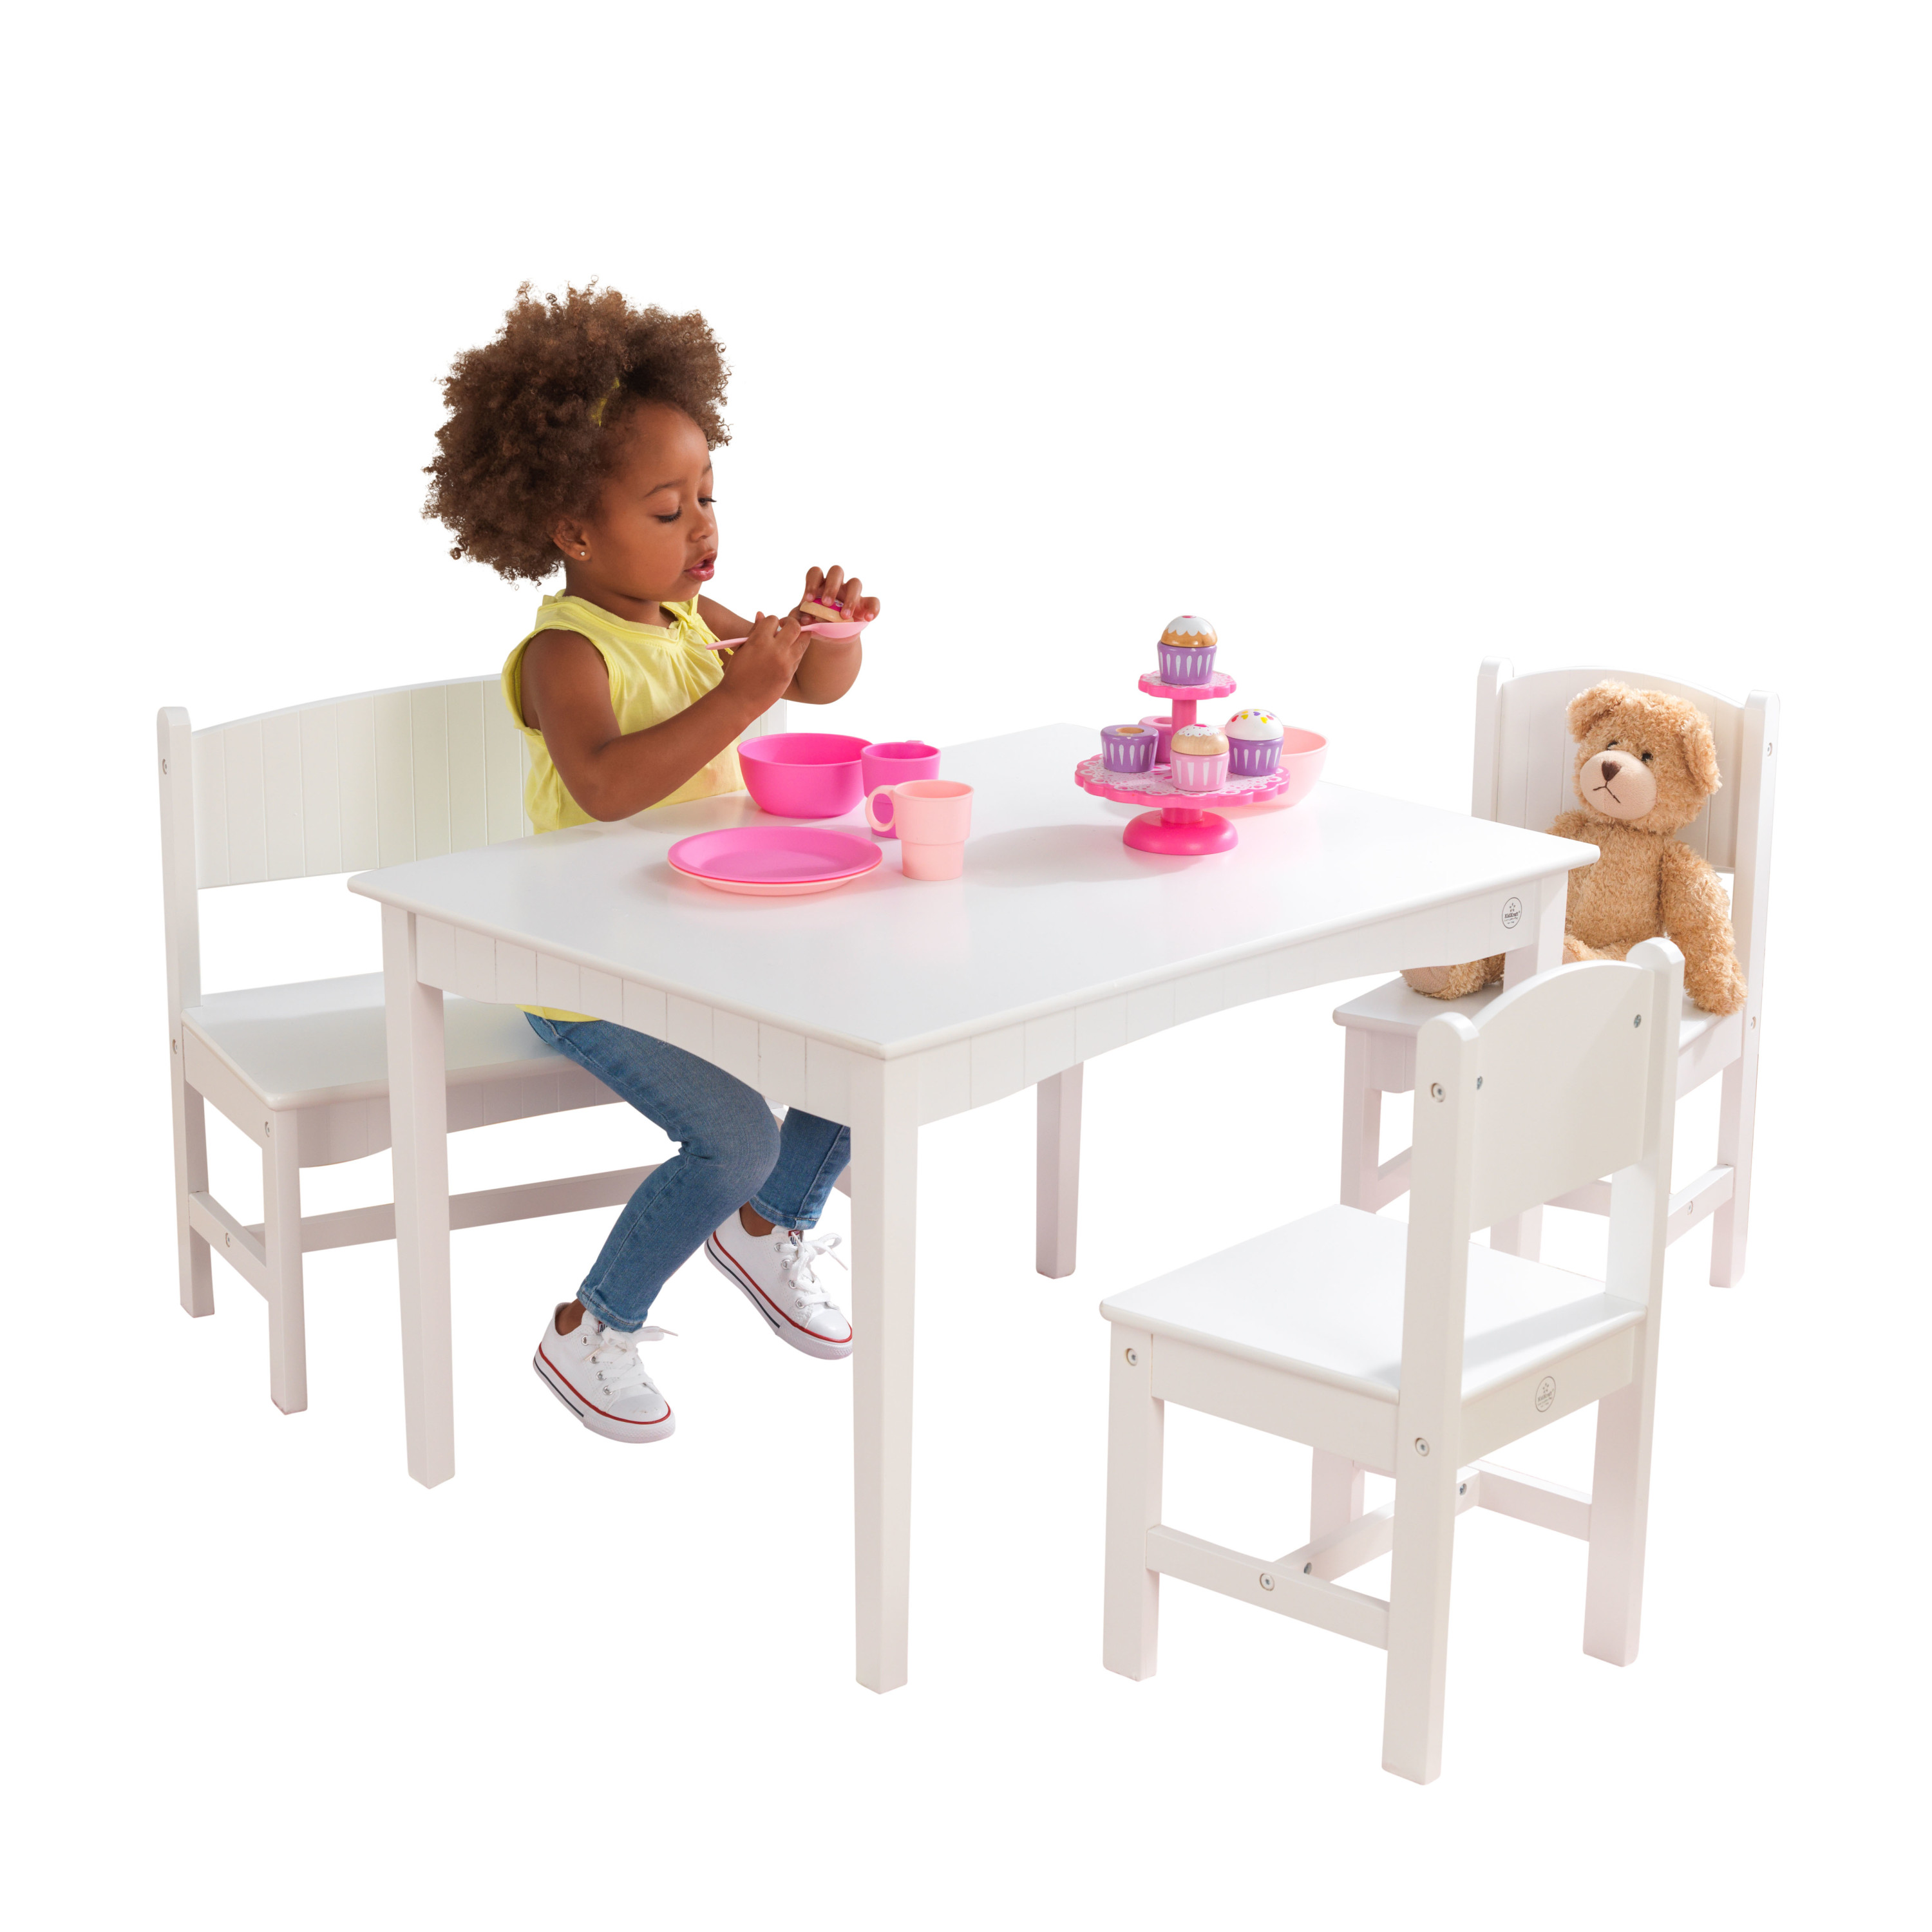 KidKraft Nantucket Wooden Table with Bench and 2 Chairs, Children's Furniture - White - image 1 of 8